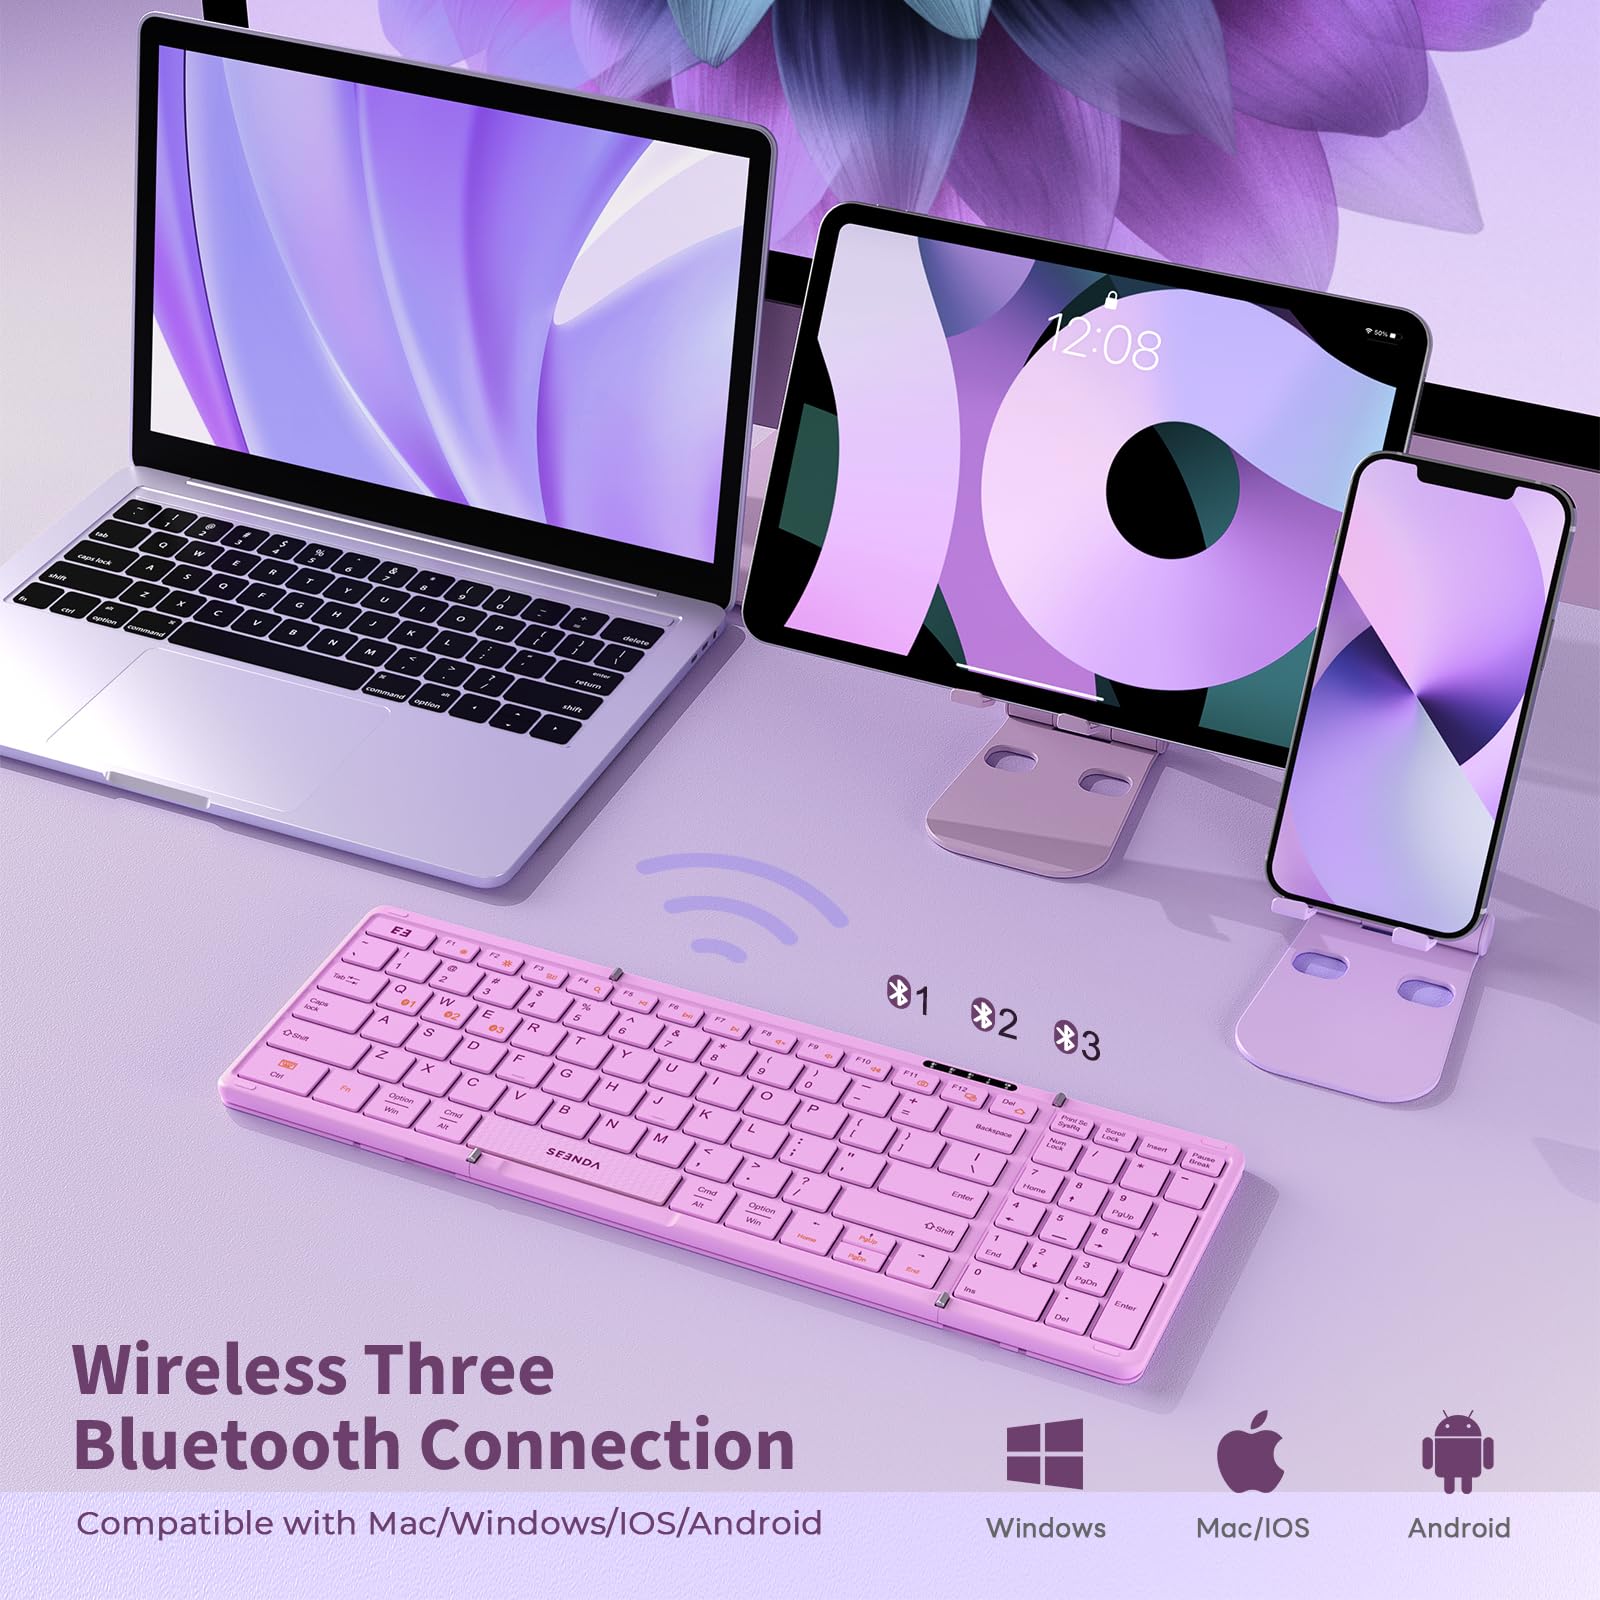 seenda Foldable Bluetooth Keyboard for Travel, Portable Wireless Folding Keyboard with Number Pad, Full-Size Rechargeable Keyboard for Laptop Tablet PC Mac Windows iOS Android - Purple Pink